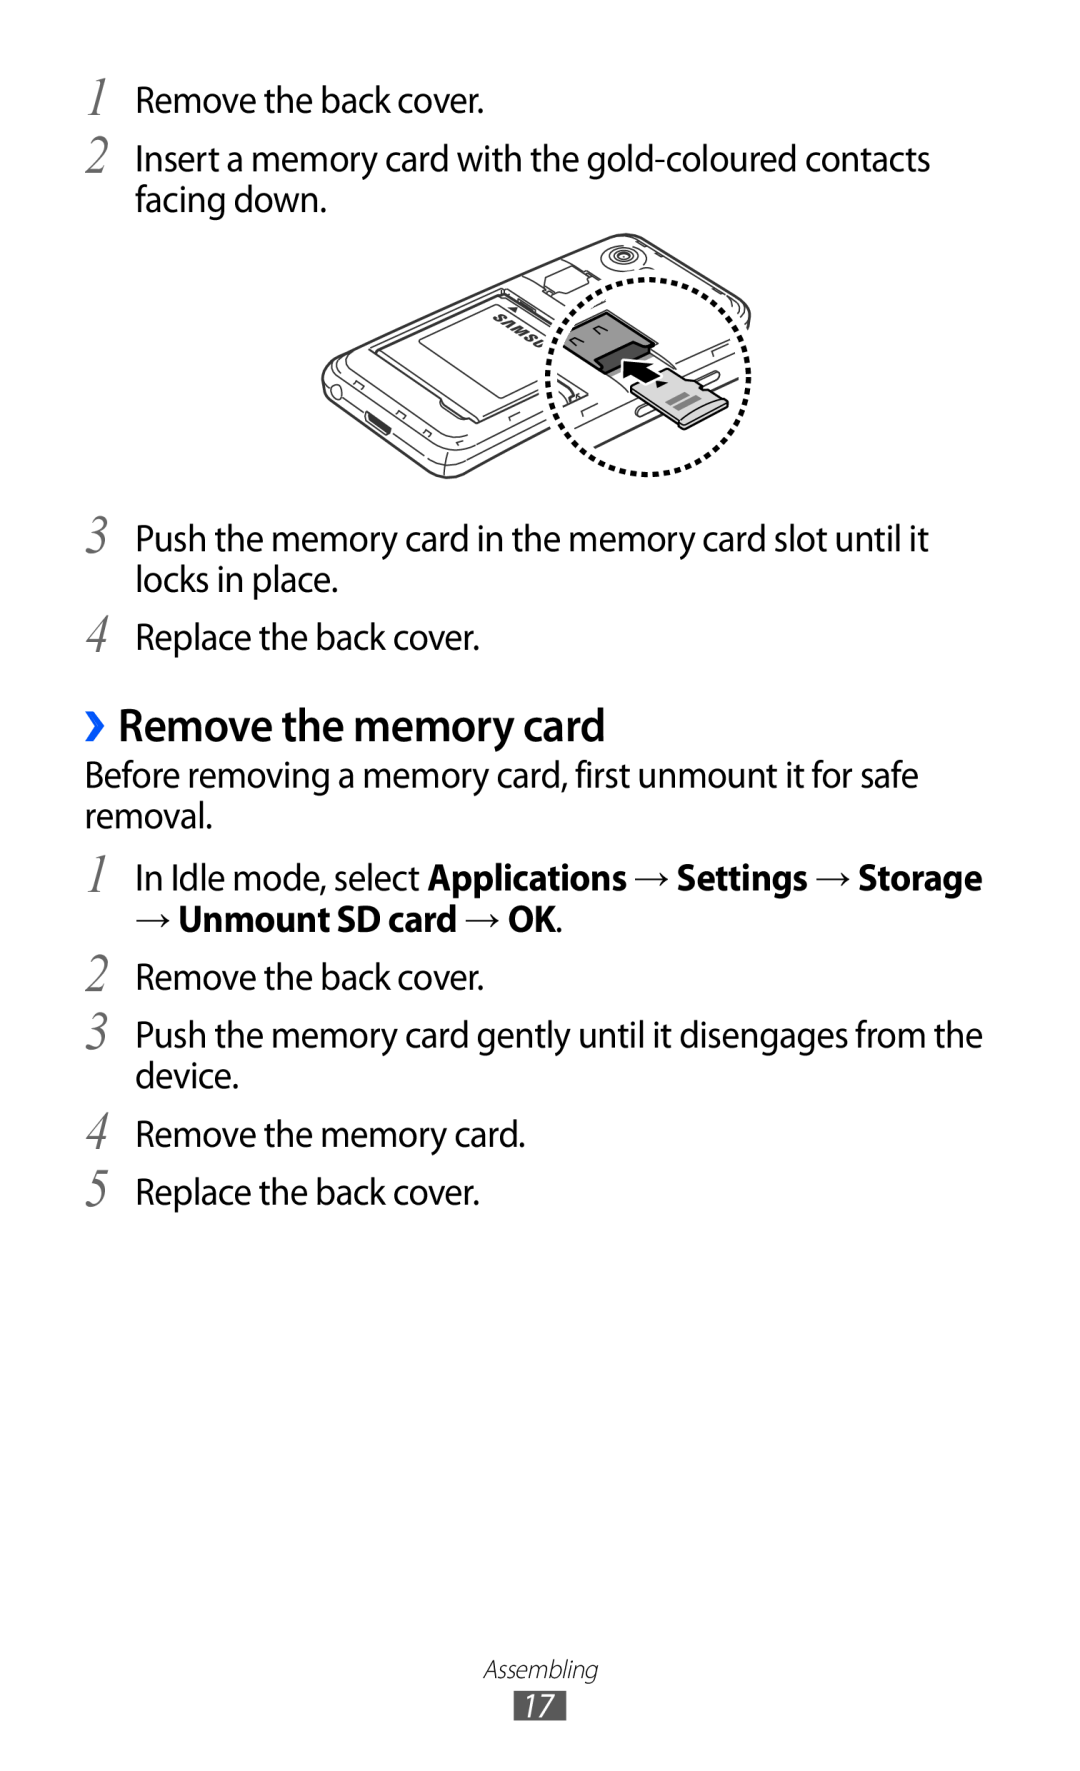 Samsung GT-I9070 user manual ››Remove the memory card, In Idle mode, select Applications → Settings → Storage 